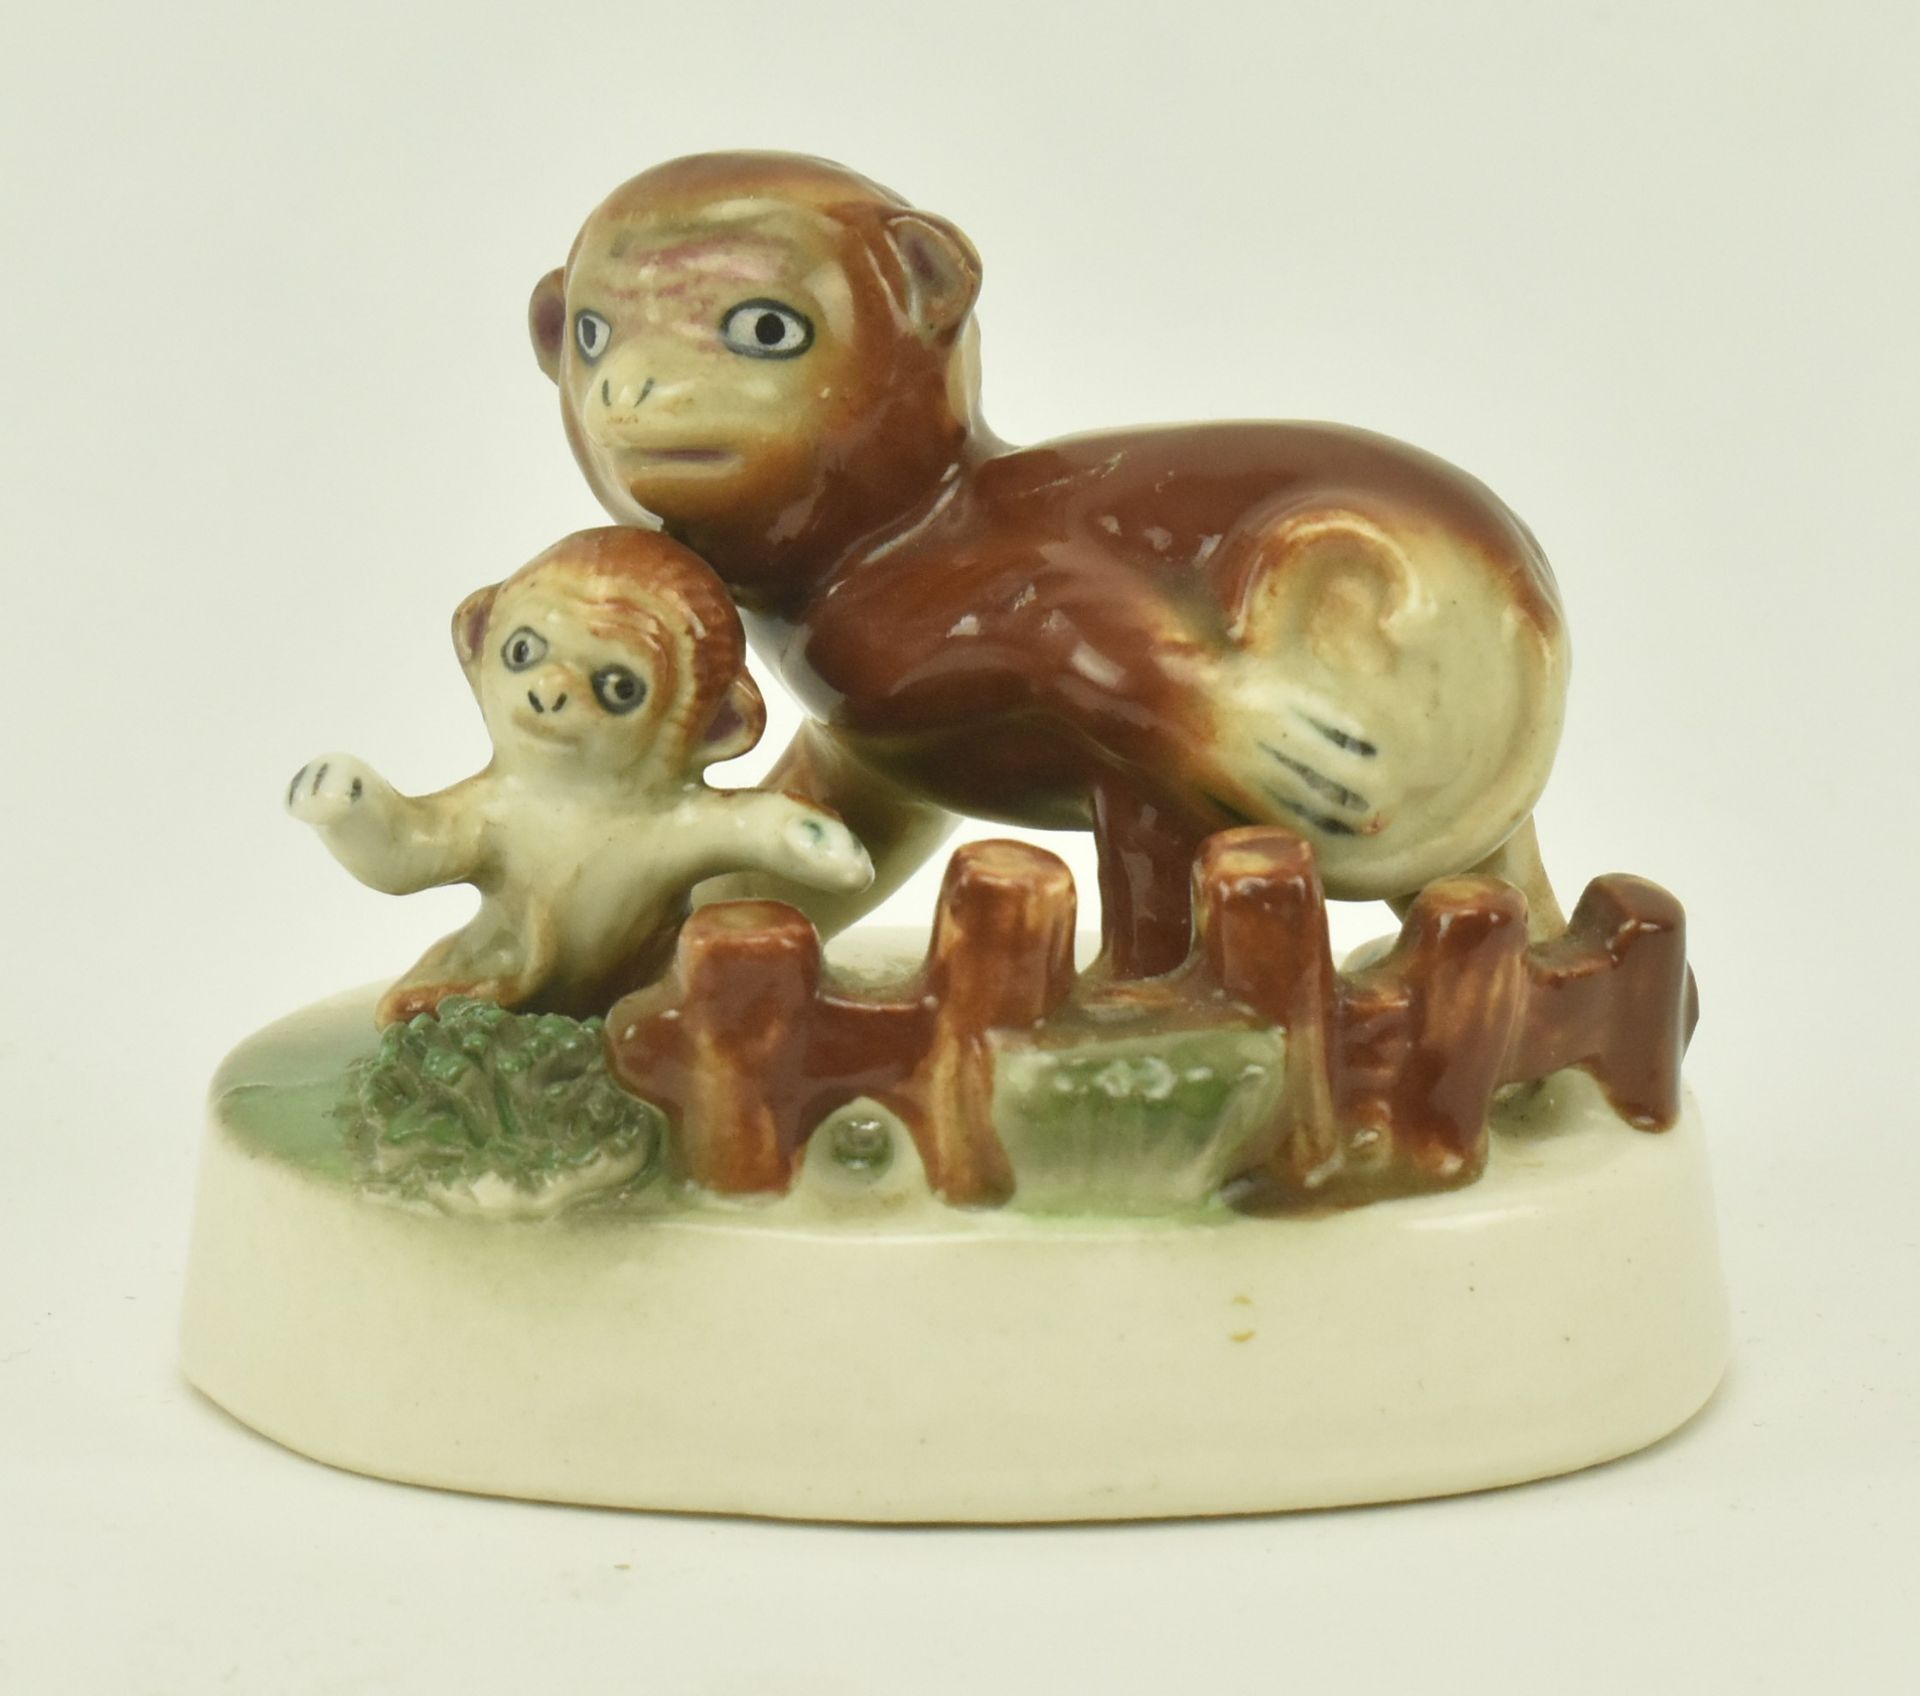 VICTORIAN STAFFORDSHIRE SCENE OF MONKEY AND CUB